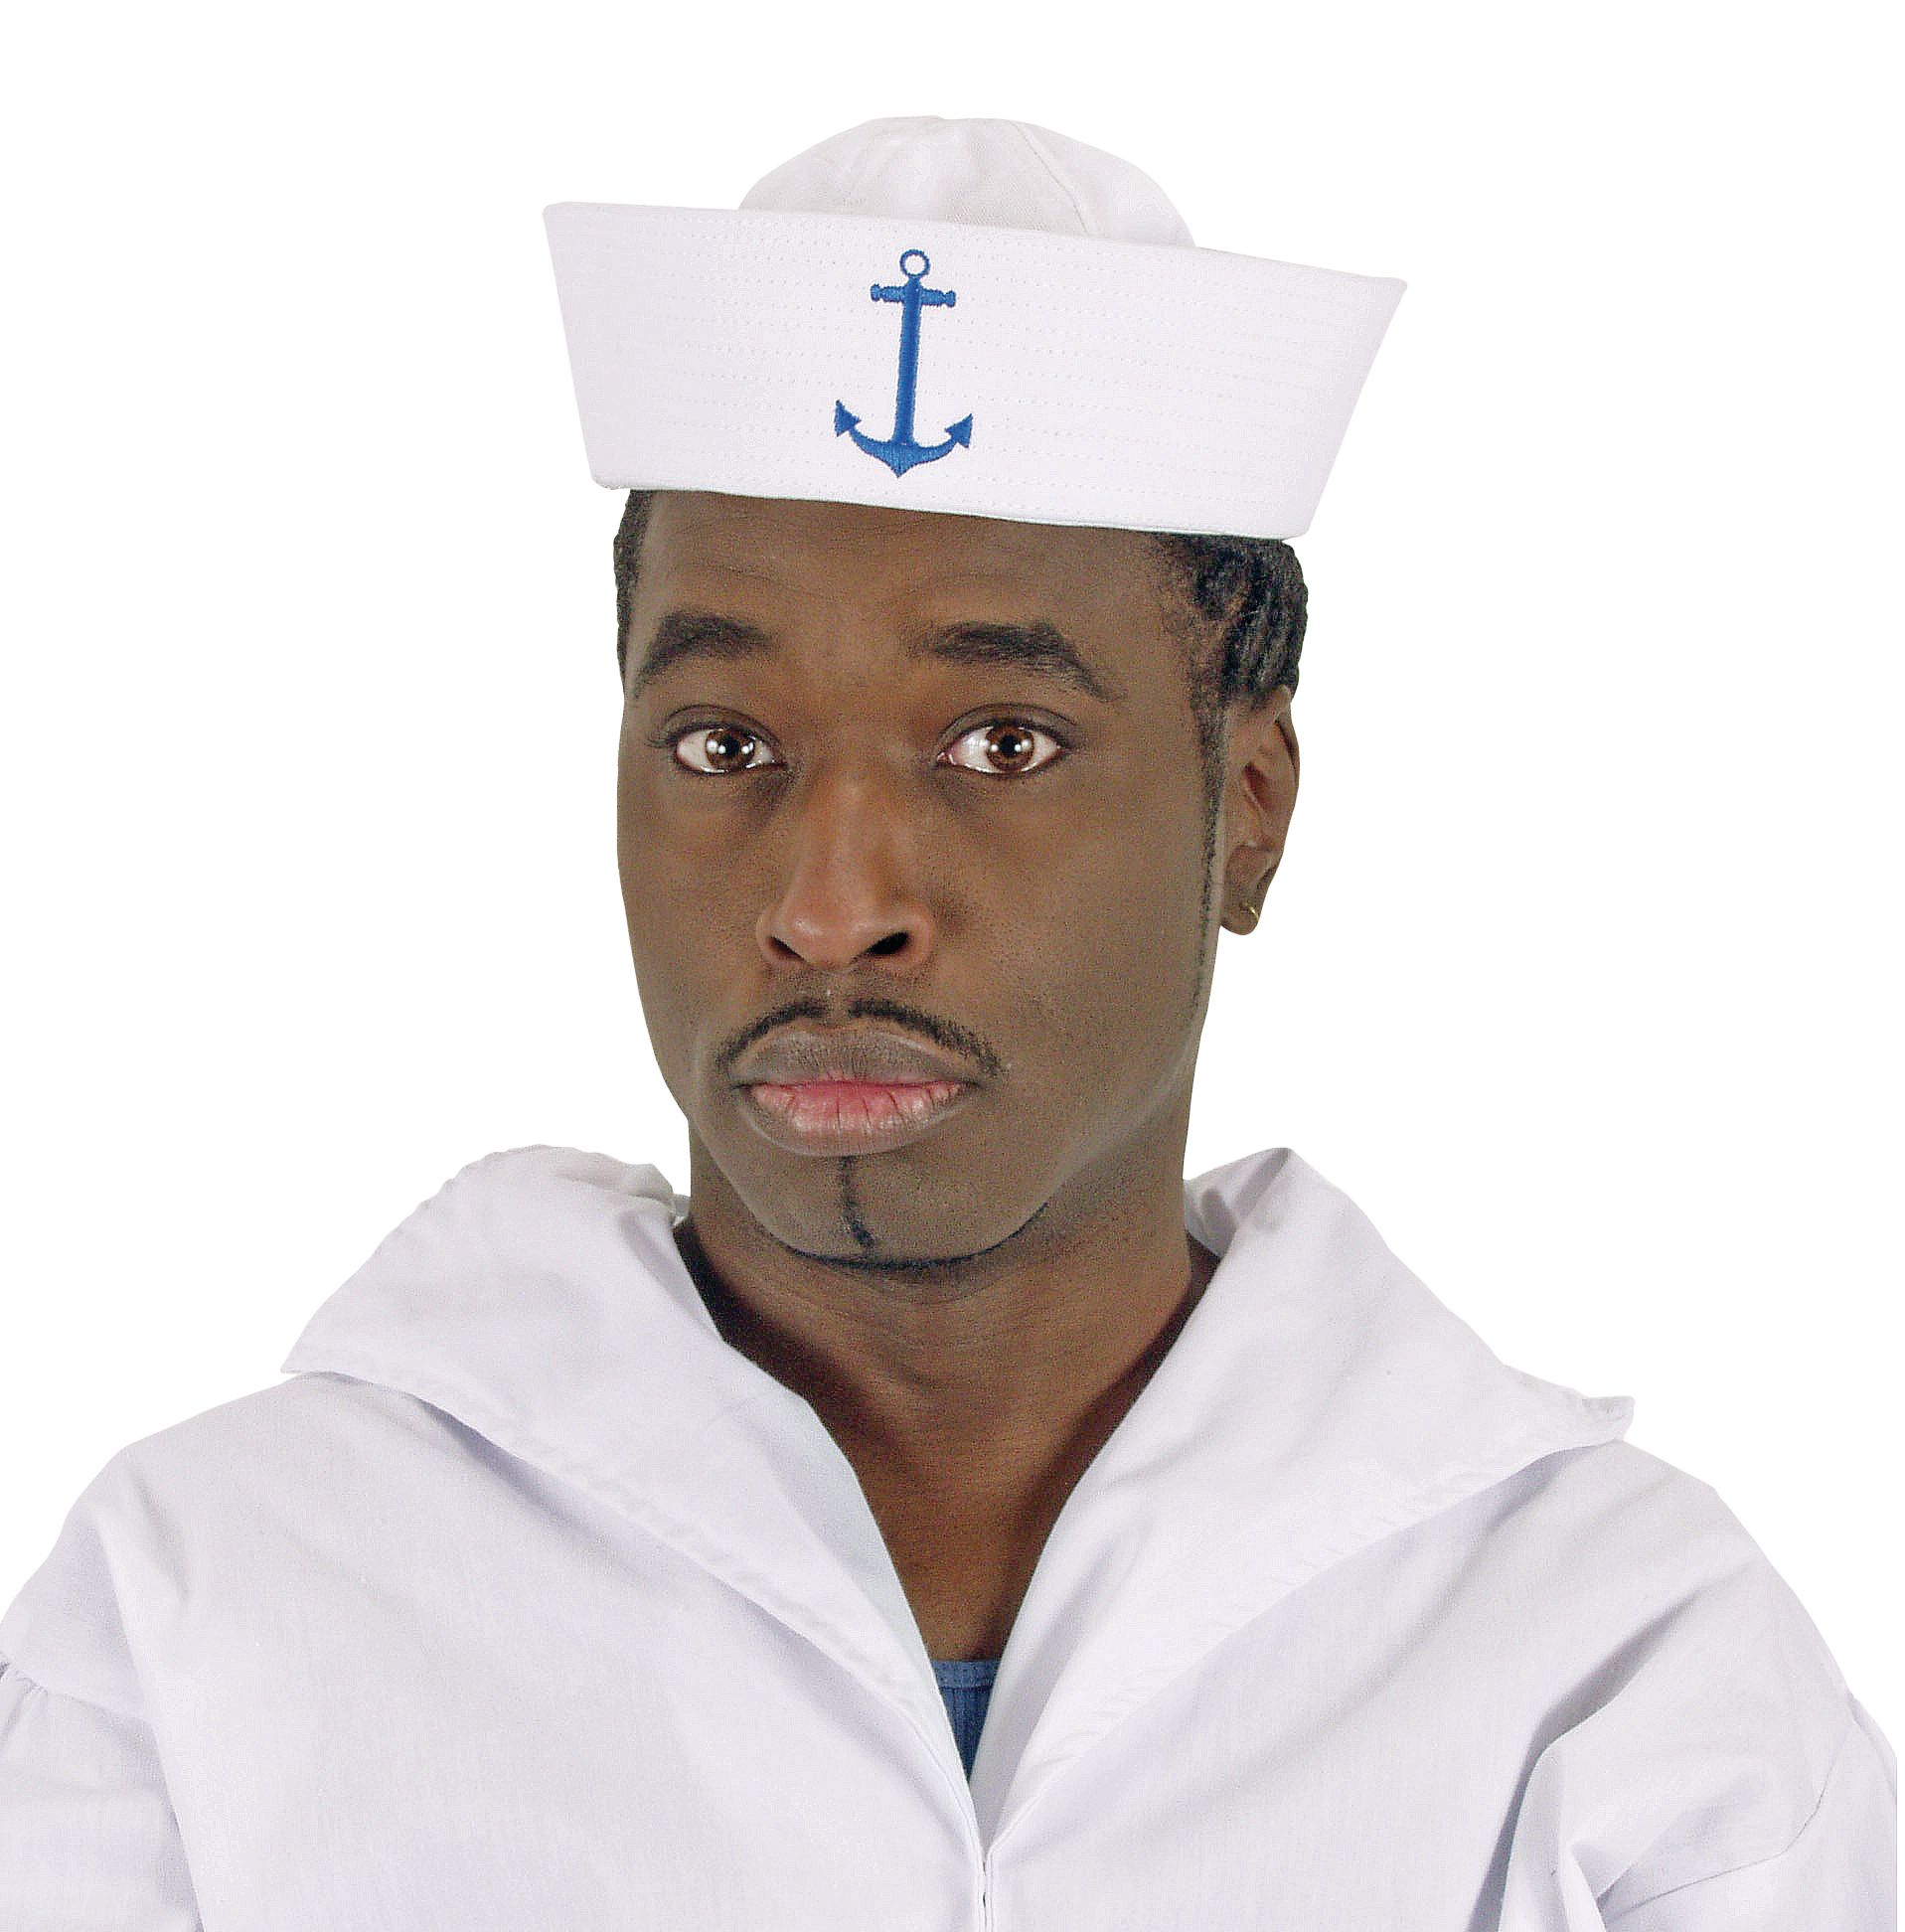 Boat Sailor Hat, White/Blue Anchor, One Size, Wearable Costume Accessory  for Halloween